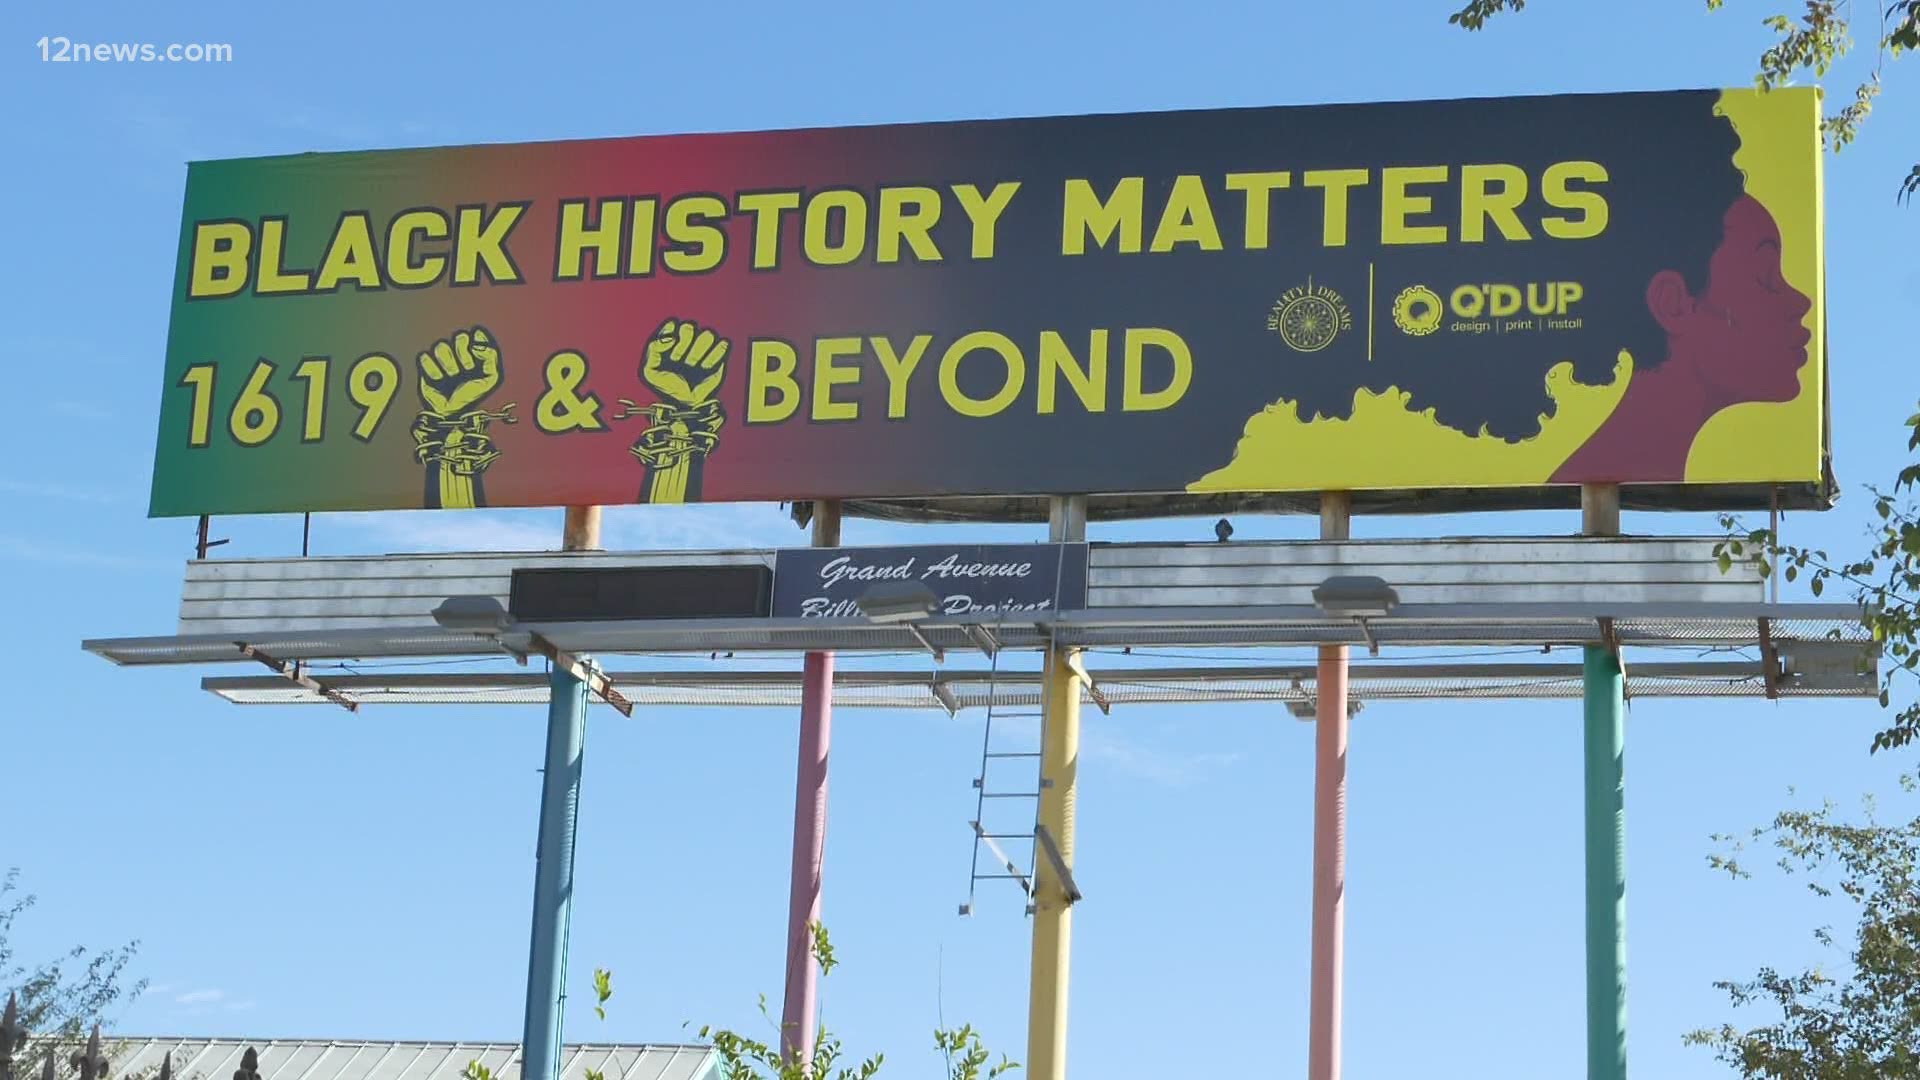 A billboard depicting Donald Trump as a Nazi was hard to miss near downtown Phoenix. That billboard has now been replaced with a new one celebrating Black history.